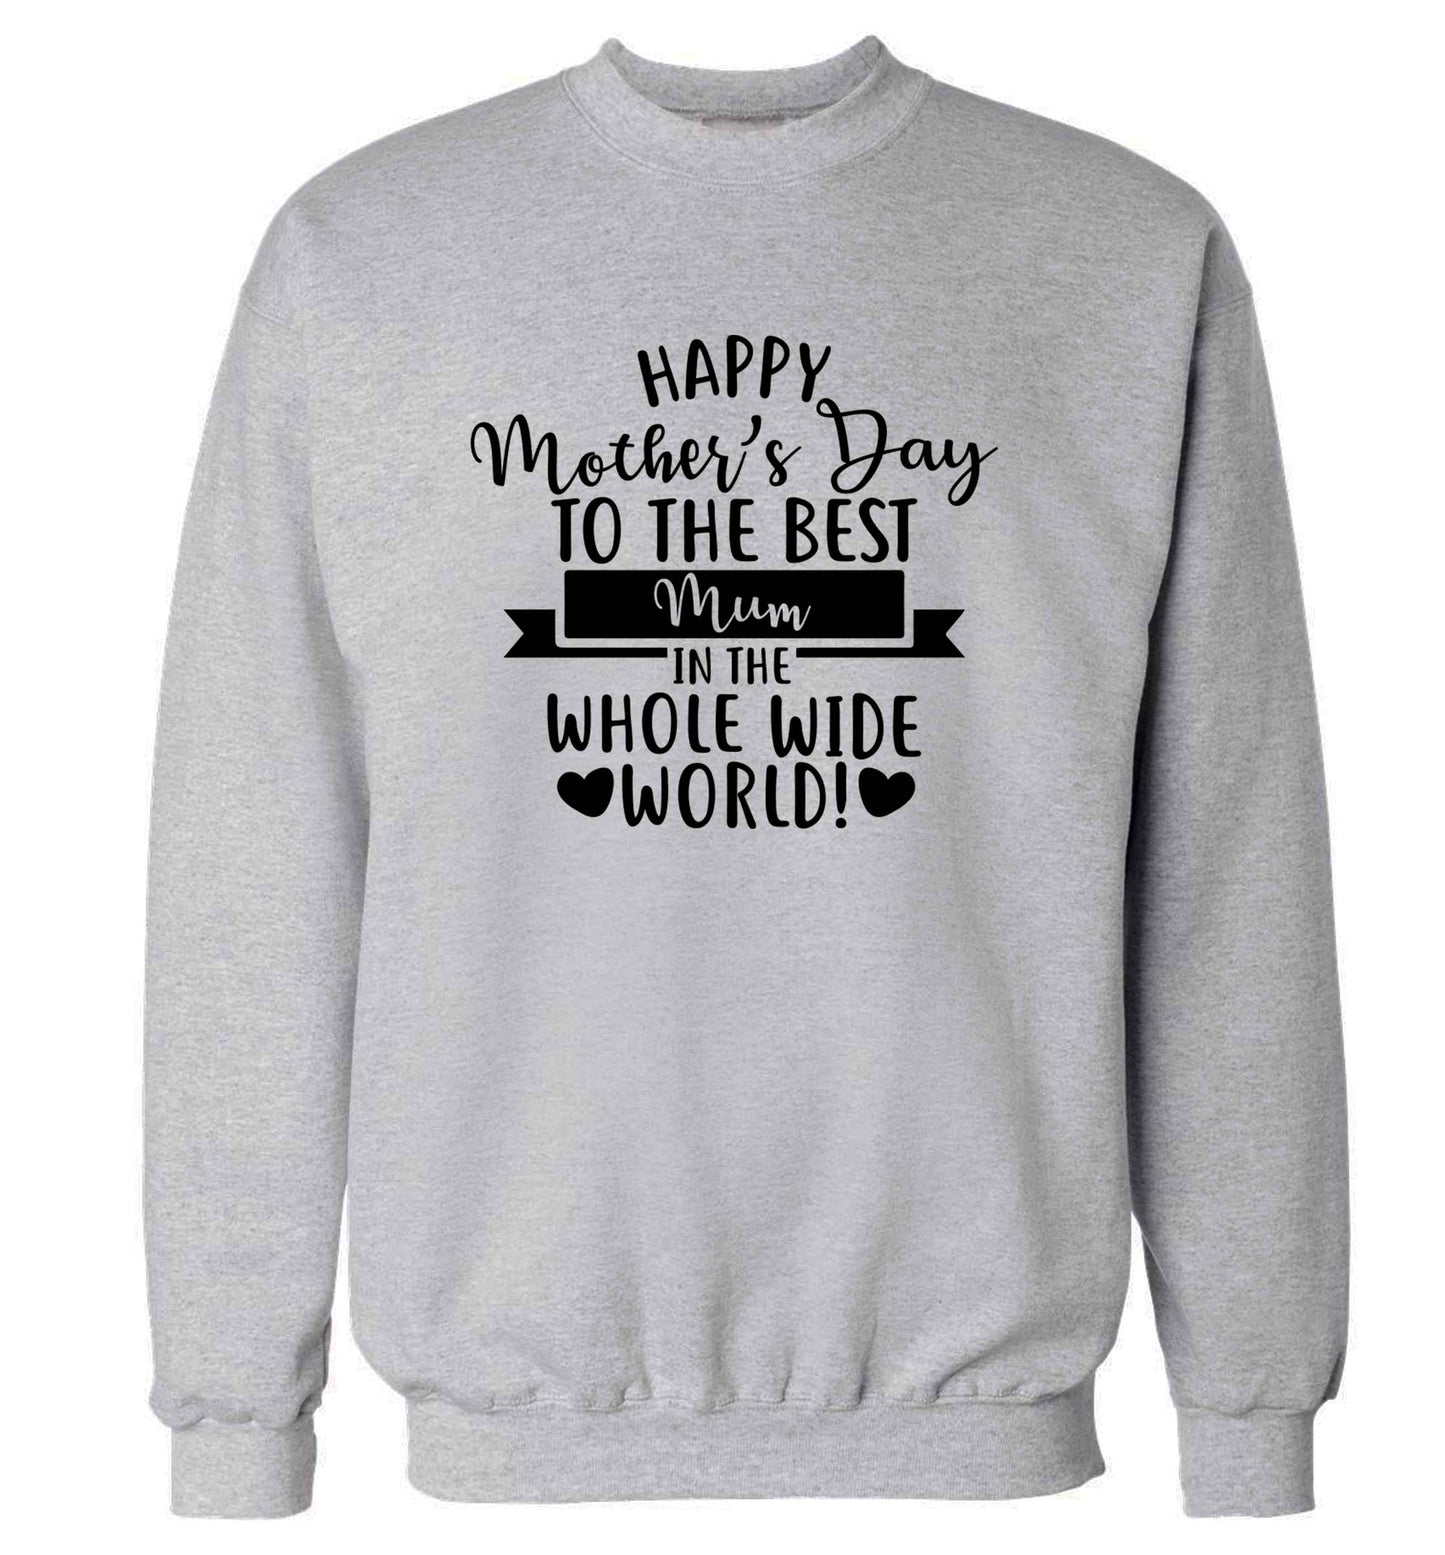 Happy mother's day to the best mum in the world adult's unisex grey sweater 2XL